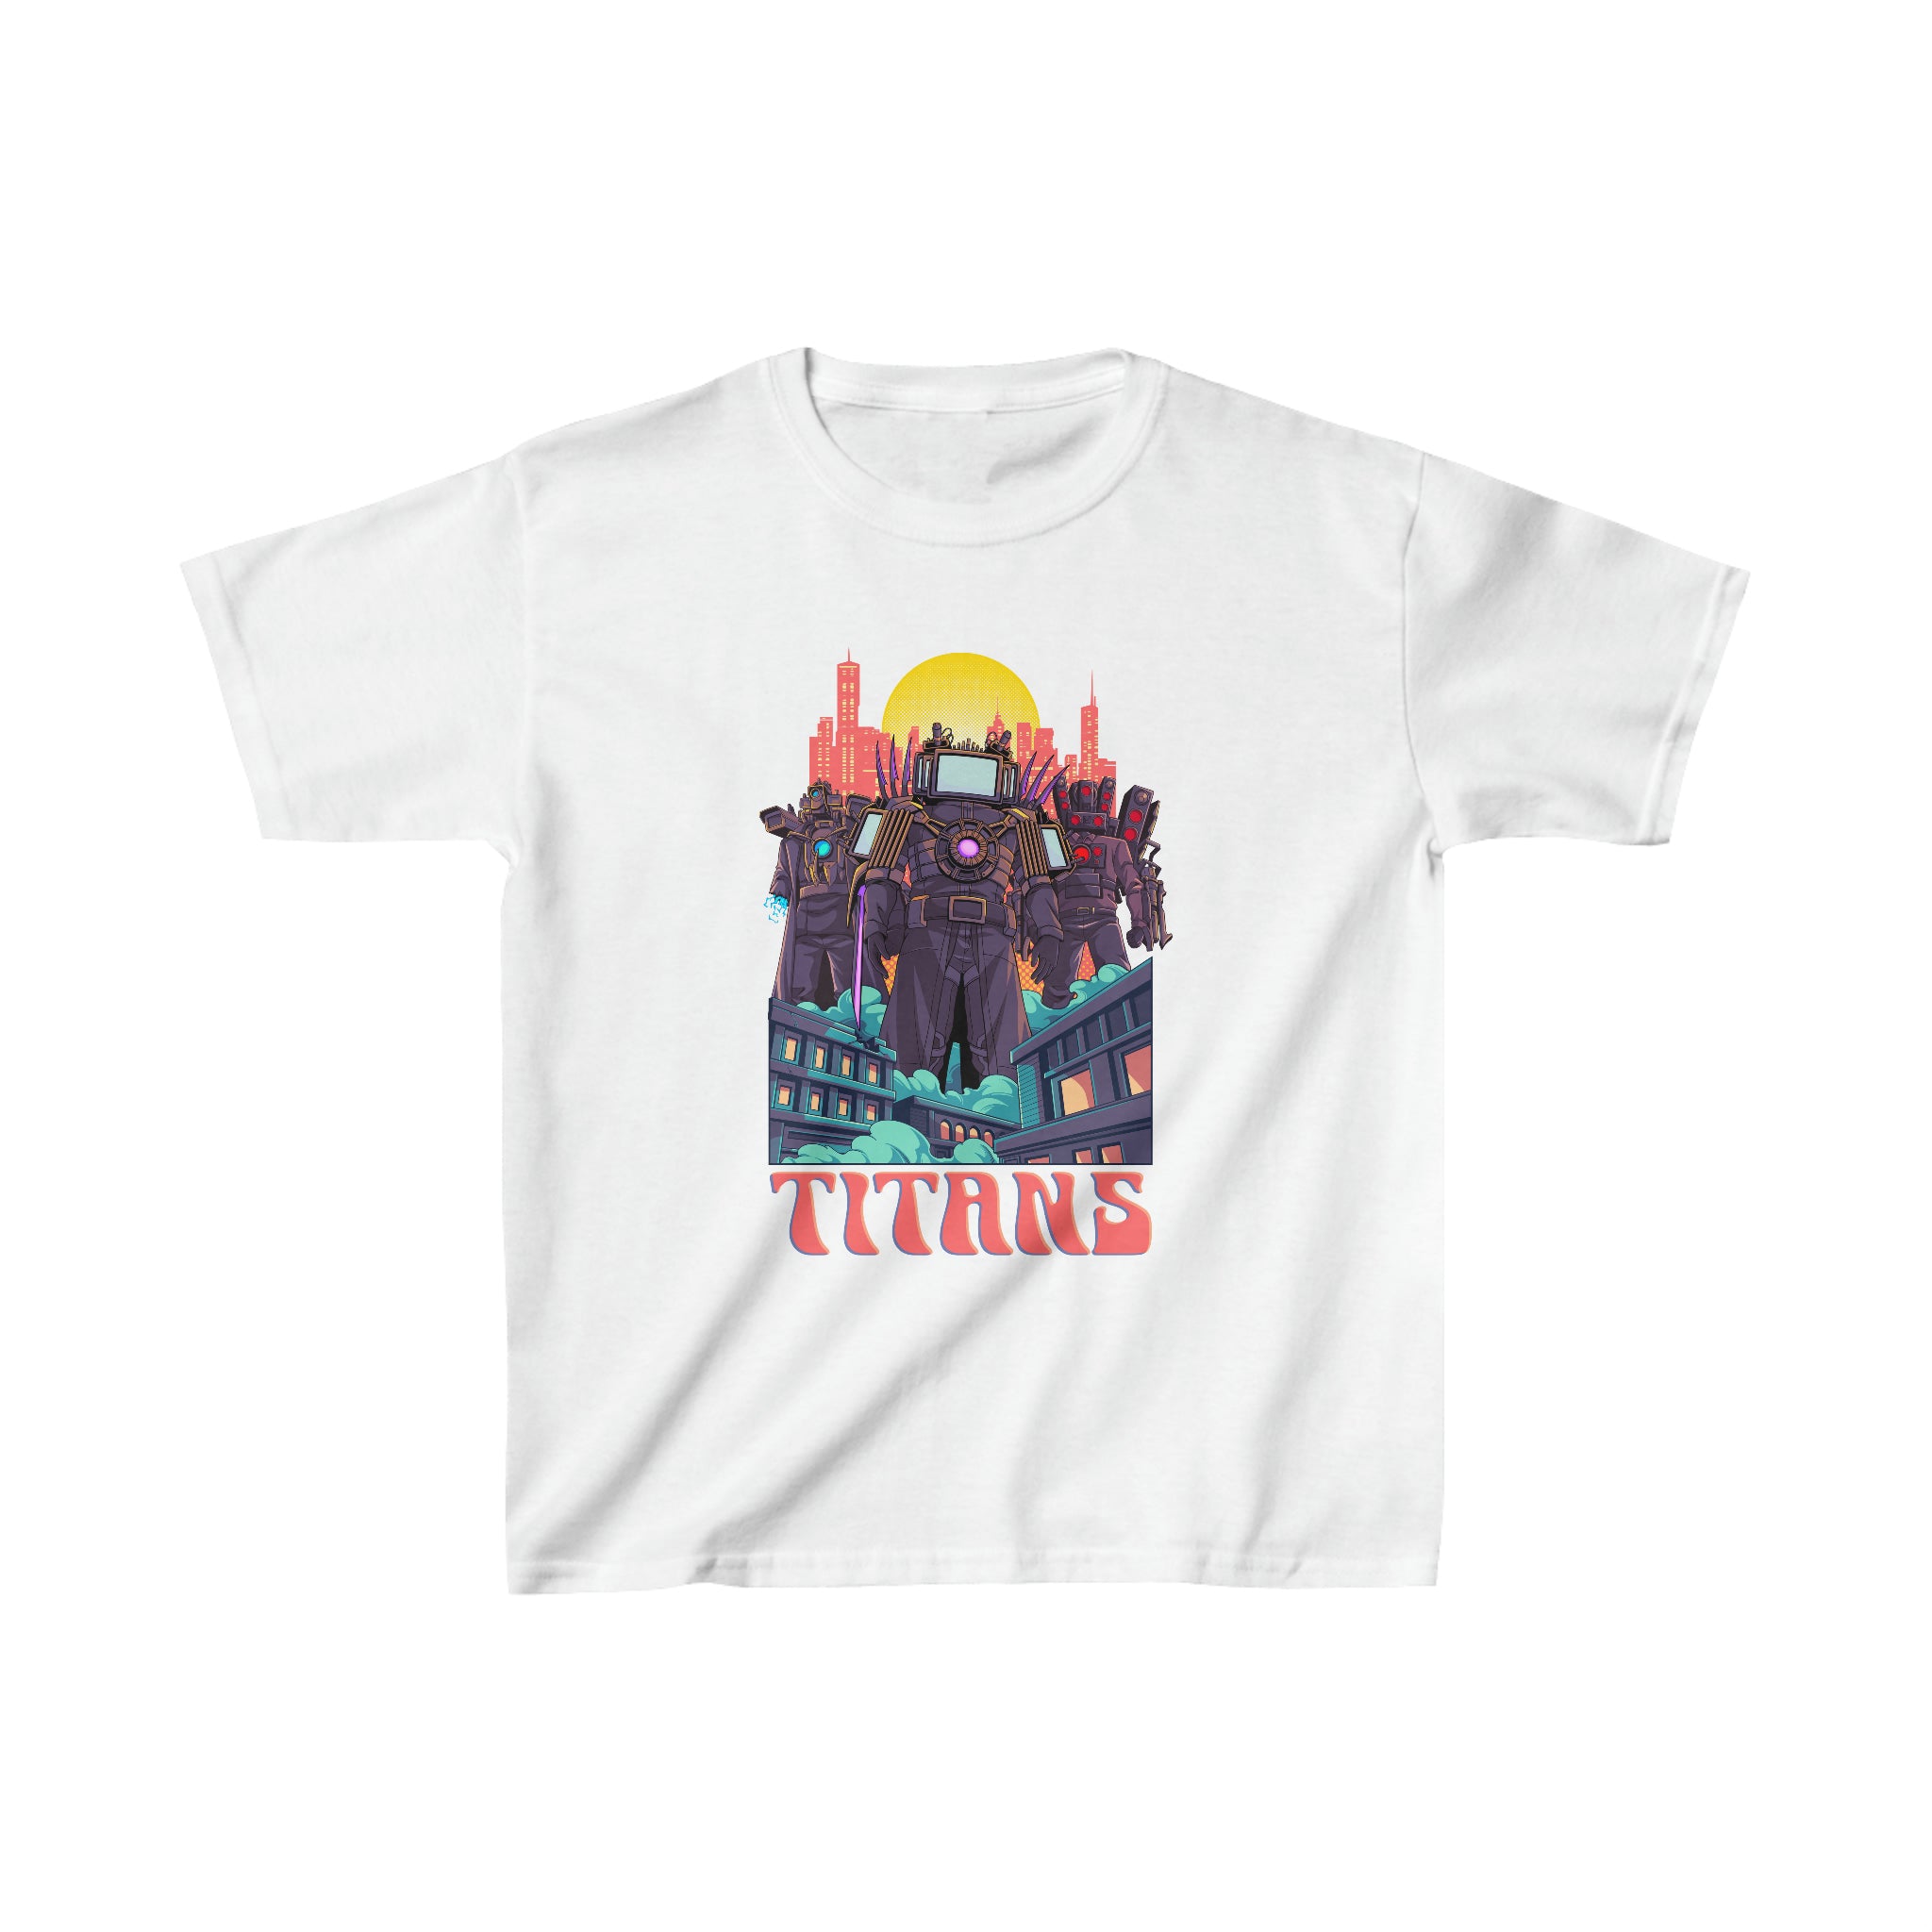 Overlords Tee - Youth